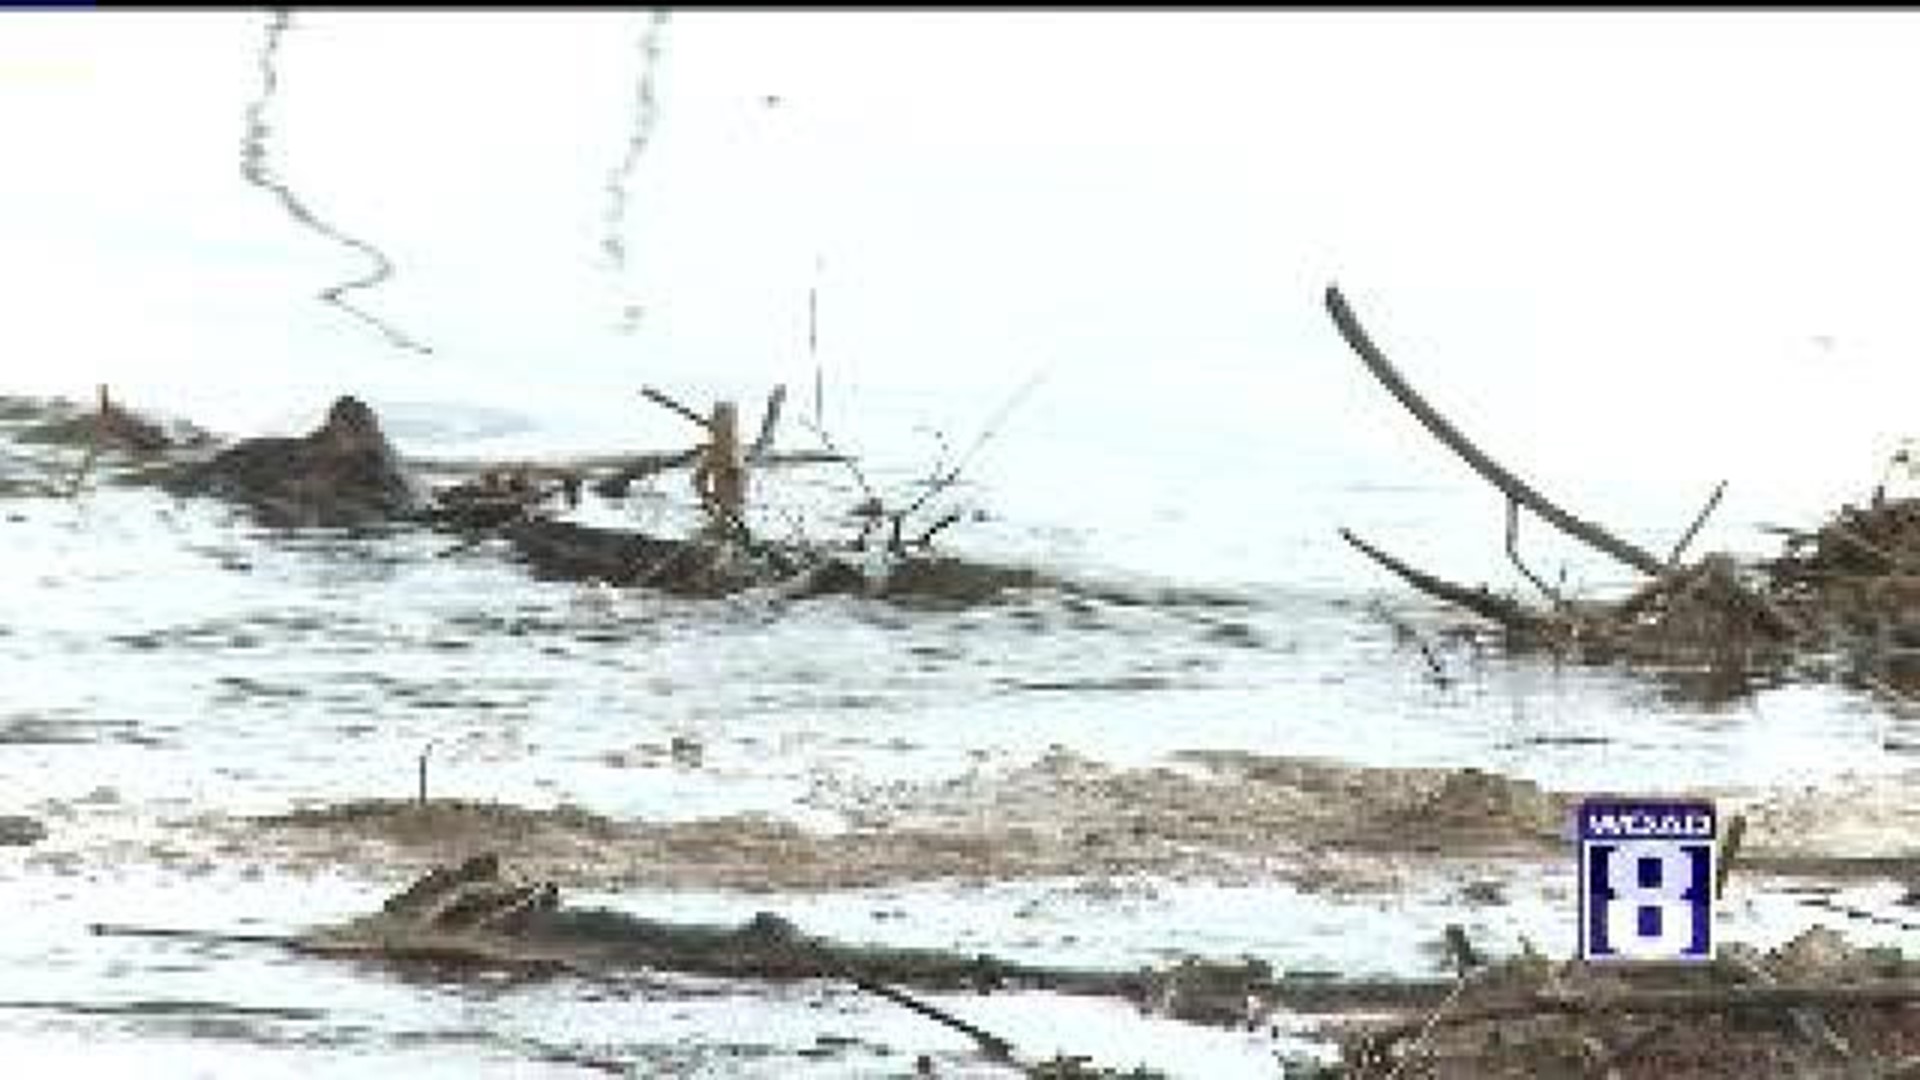 Locals prepare for potential flooding